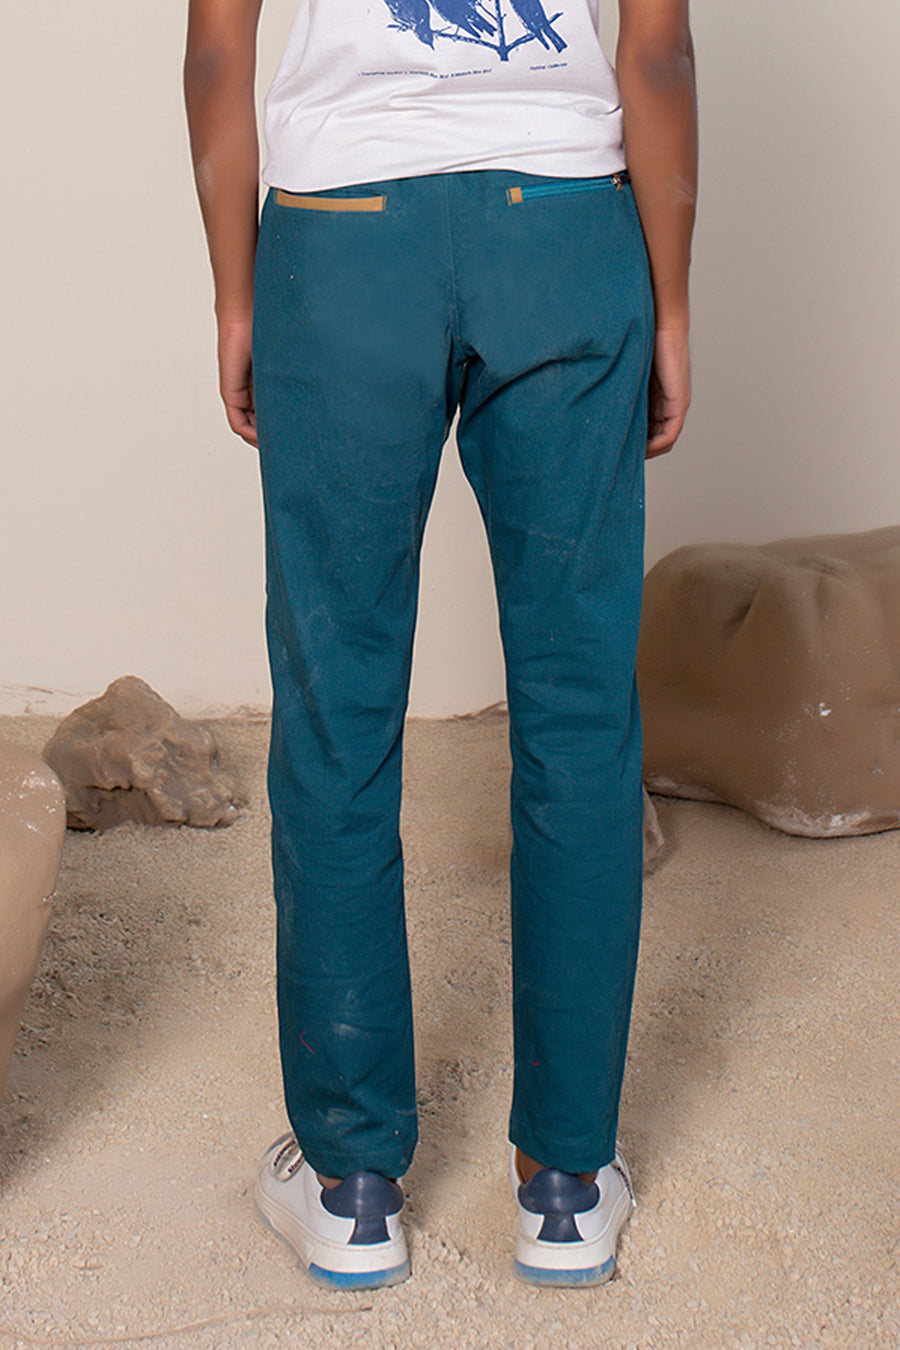 Sequoia Canvas Pant Teal